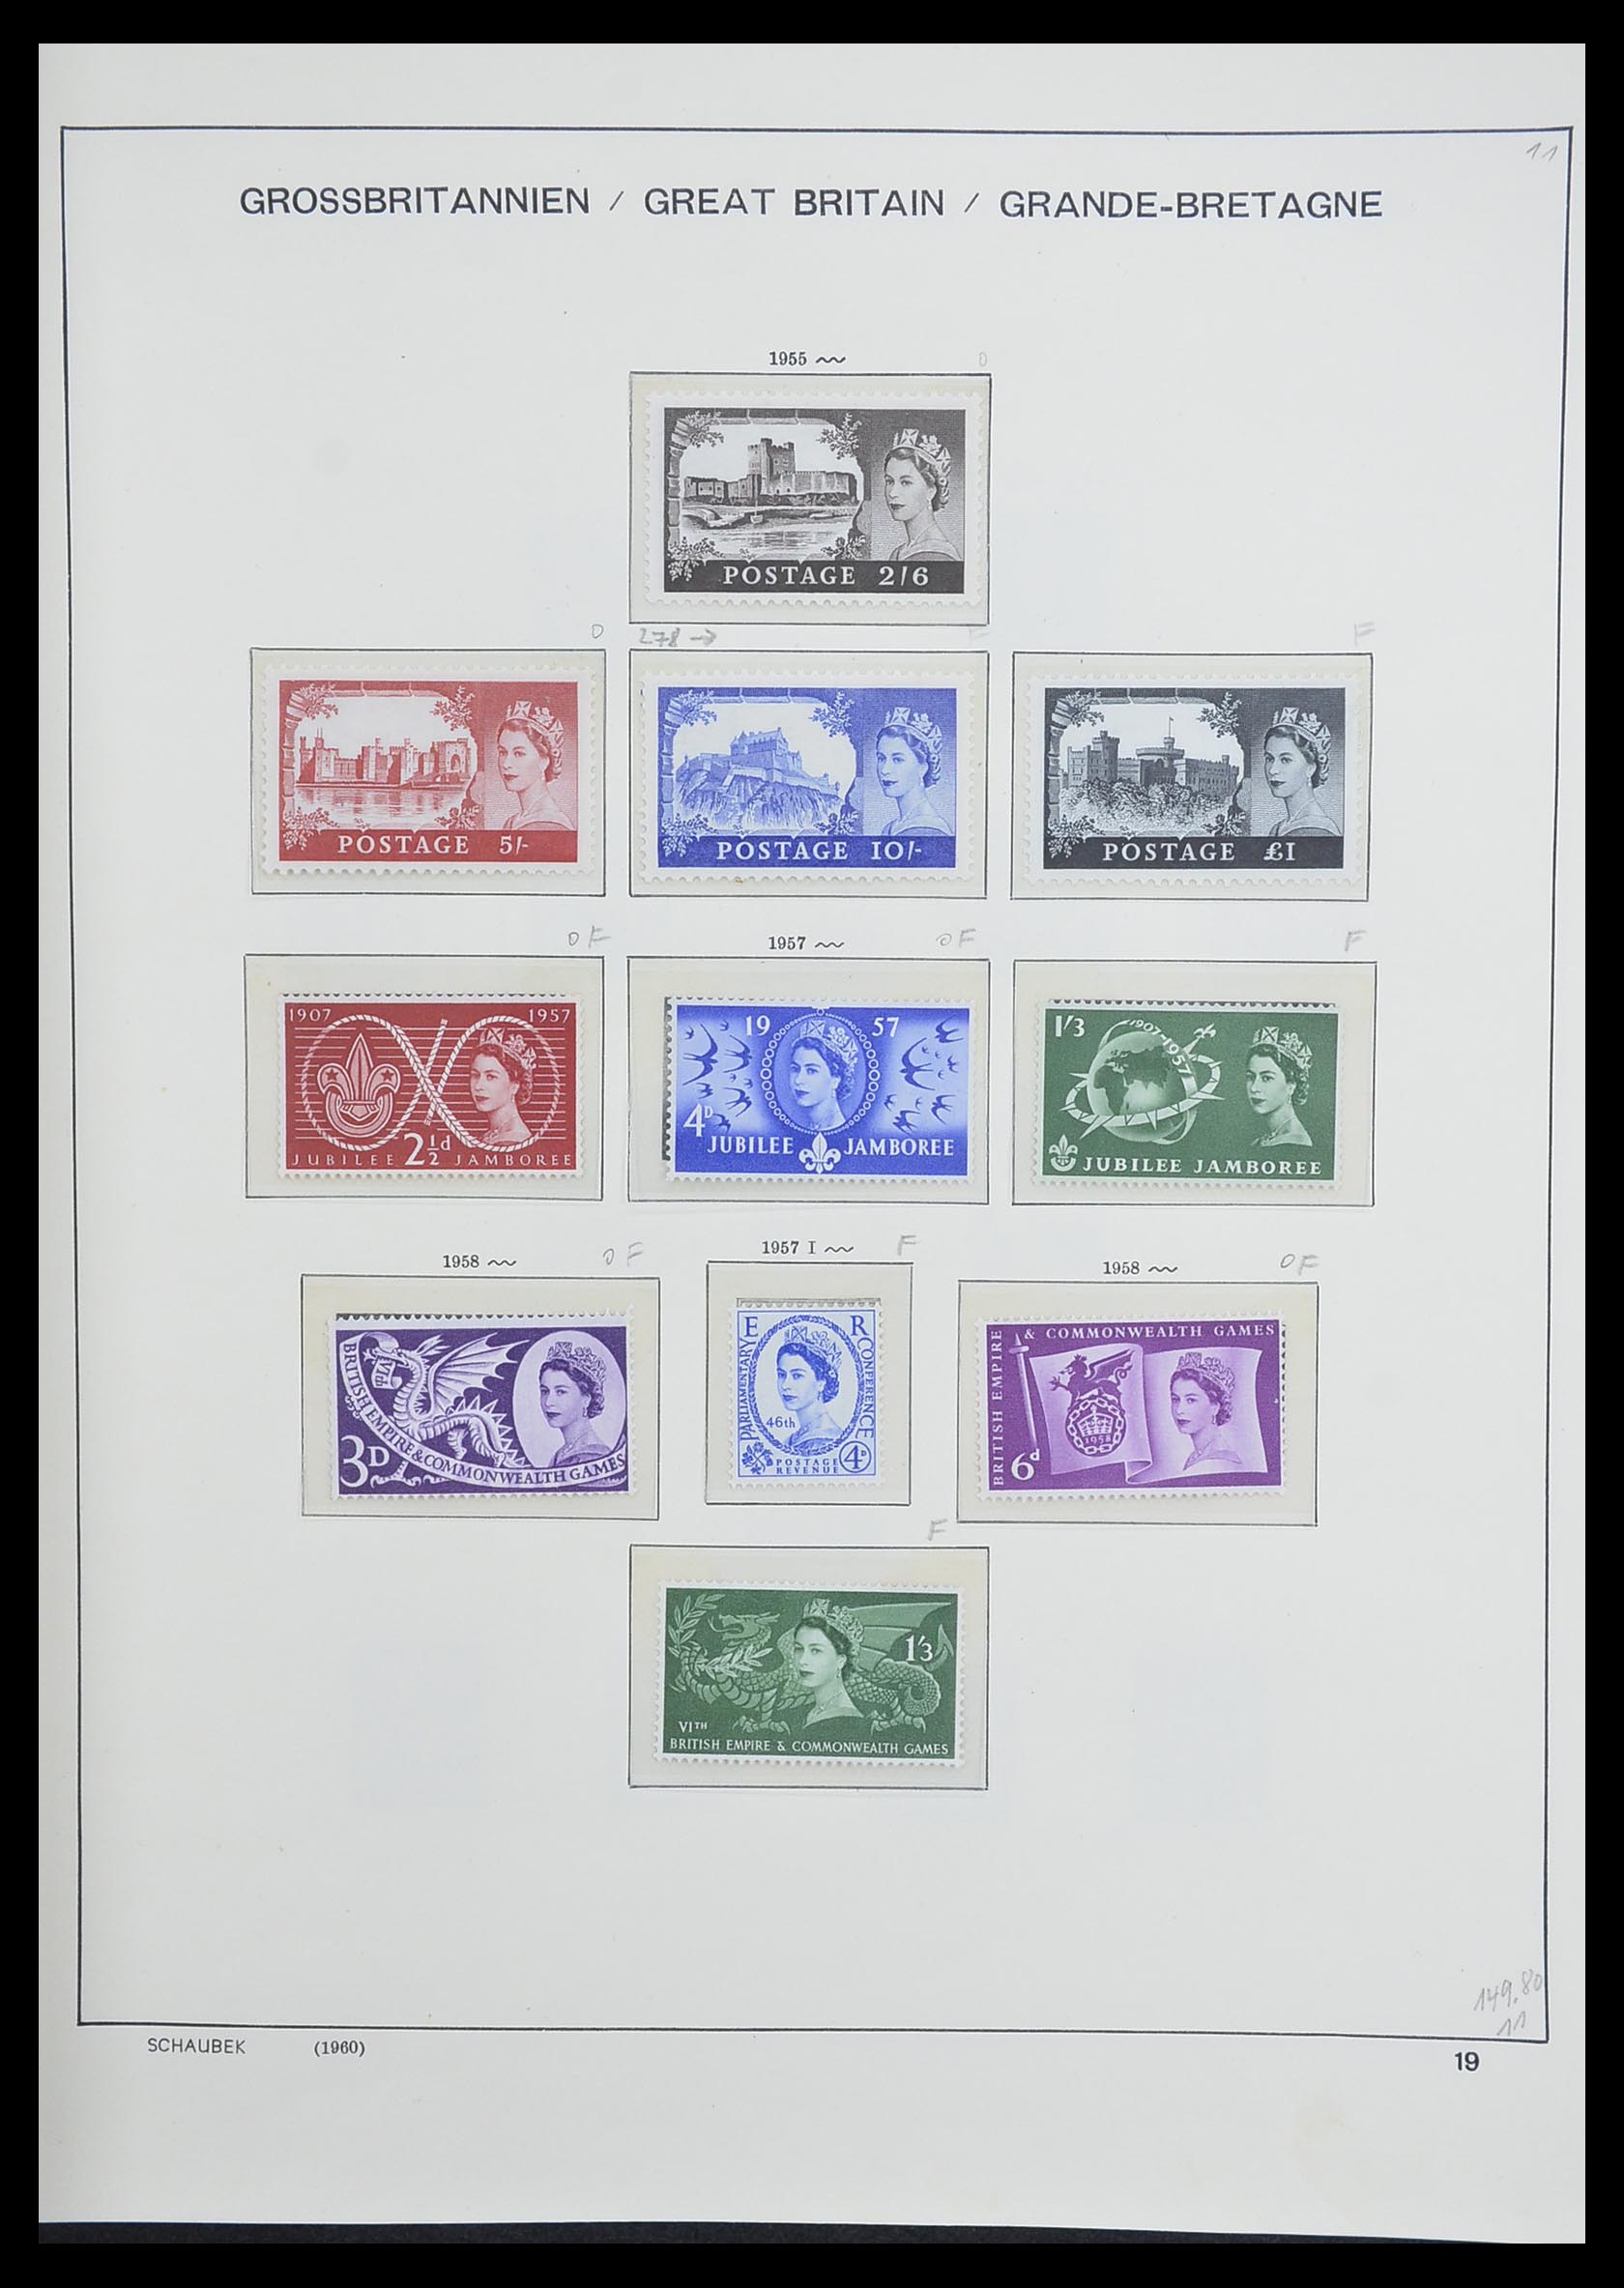 33250 021 - Stamp collection 33250 Great Britain 1841-1995.